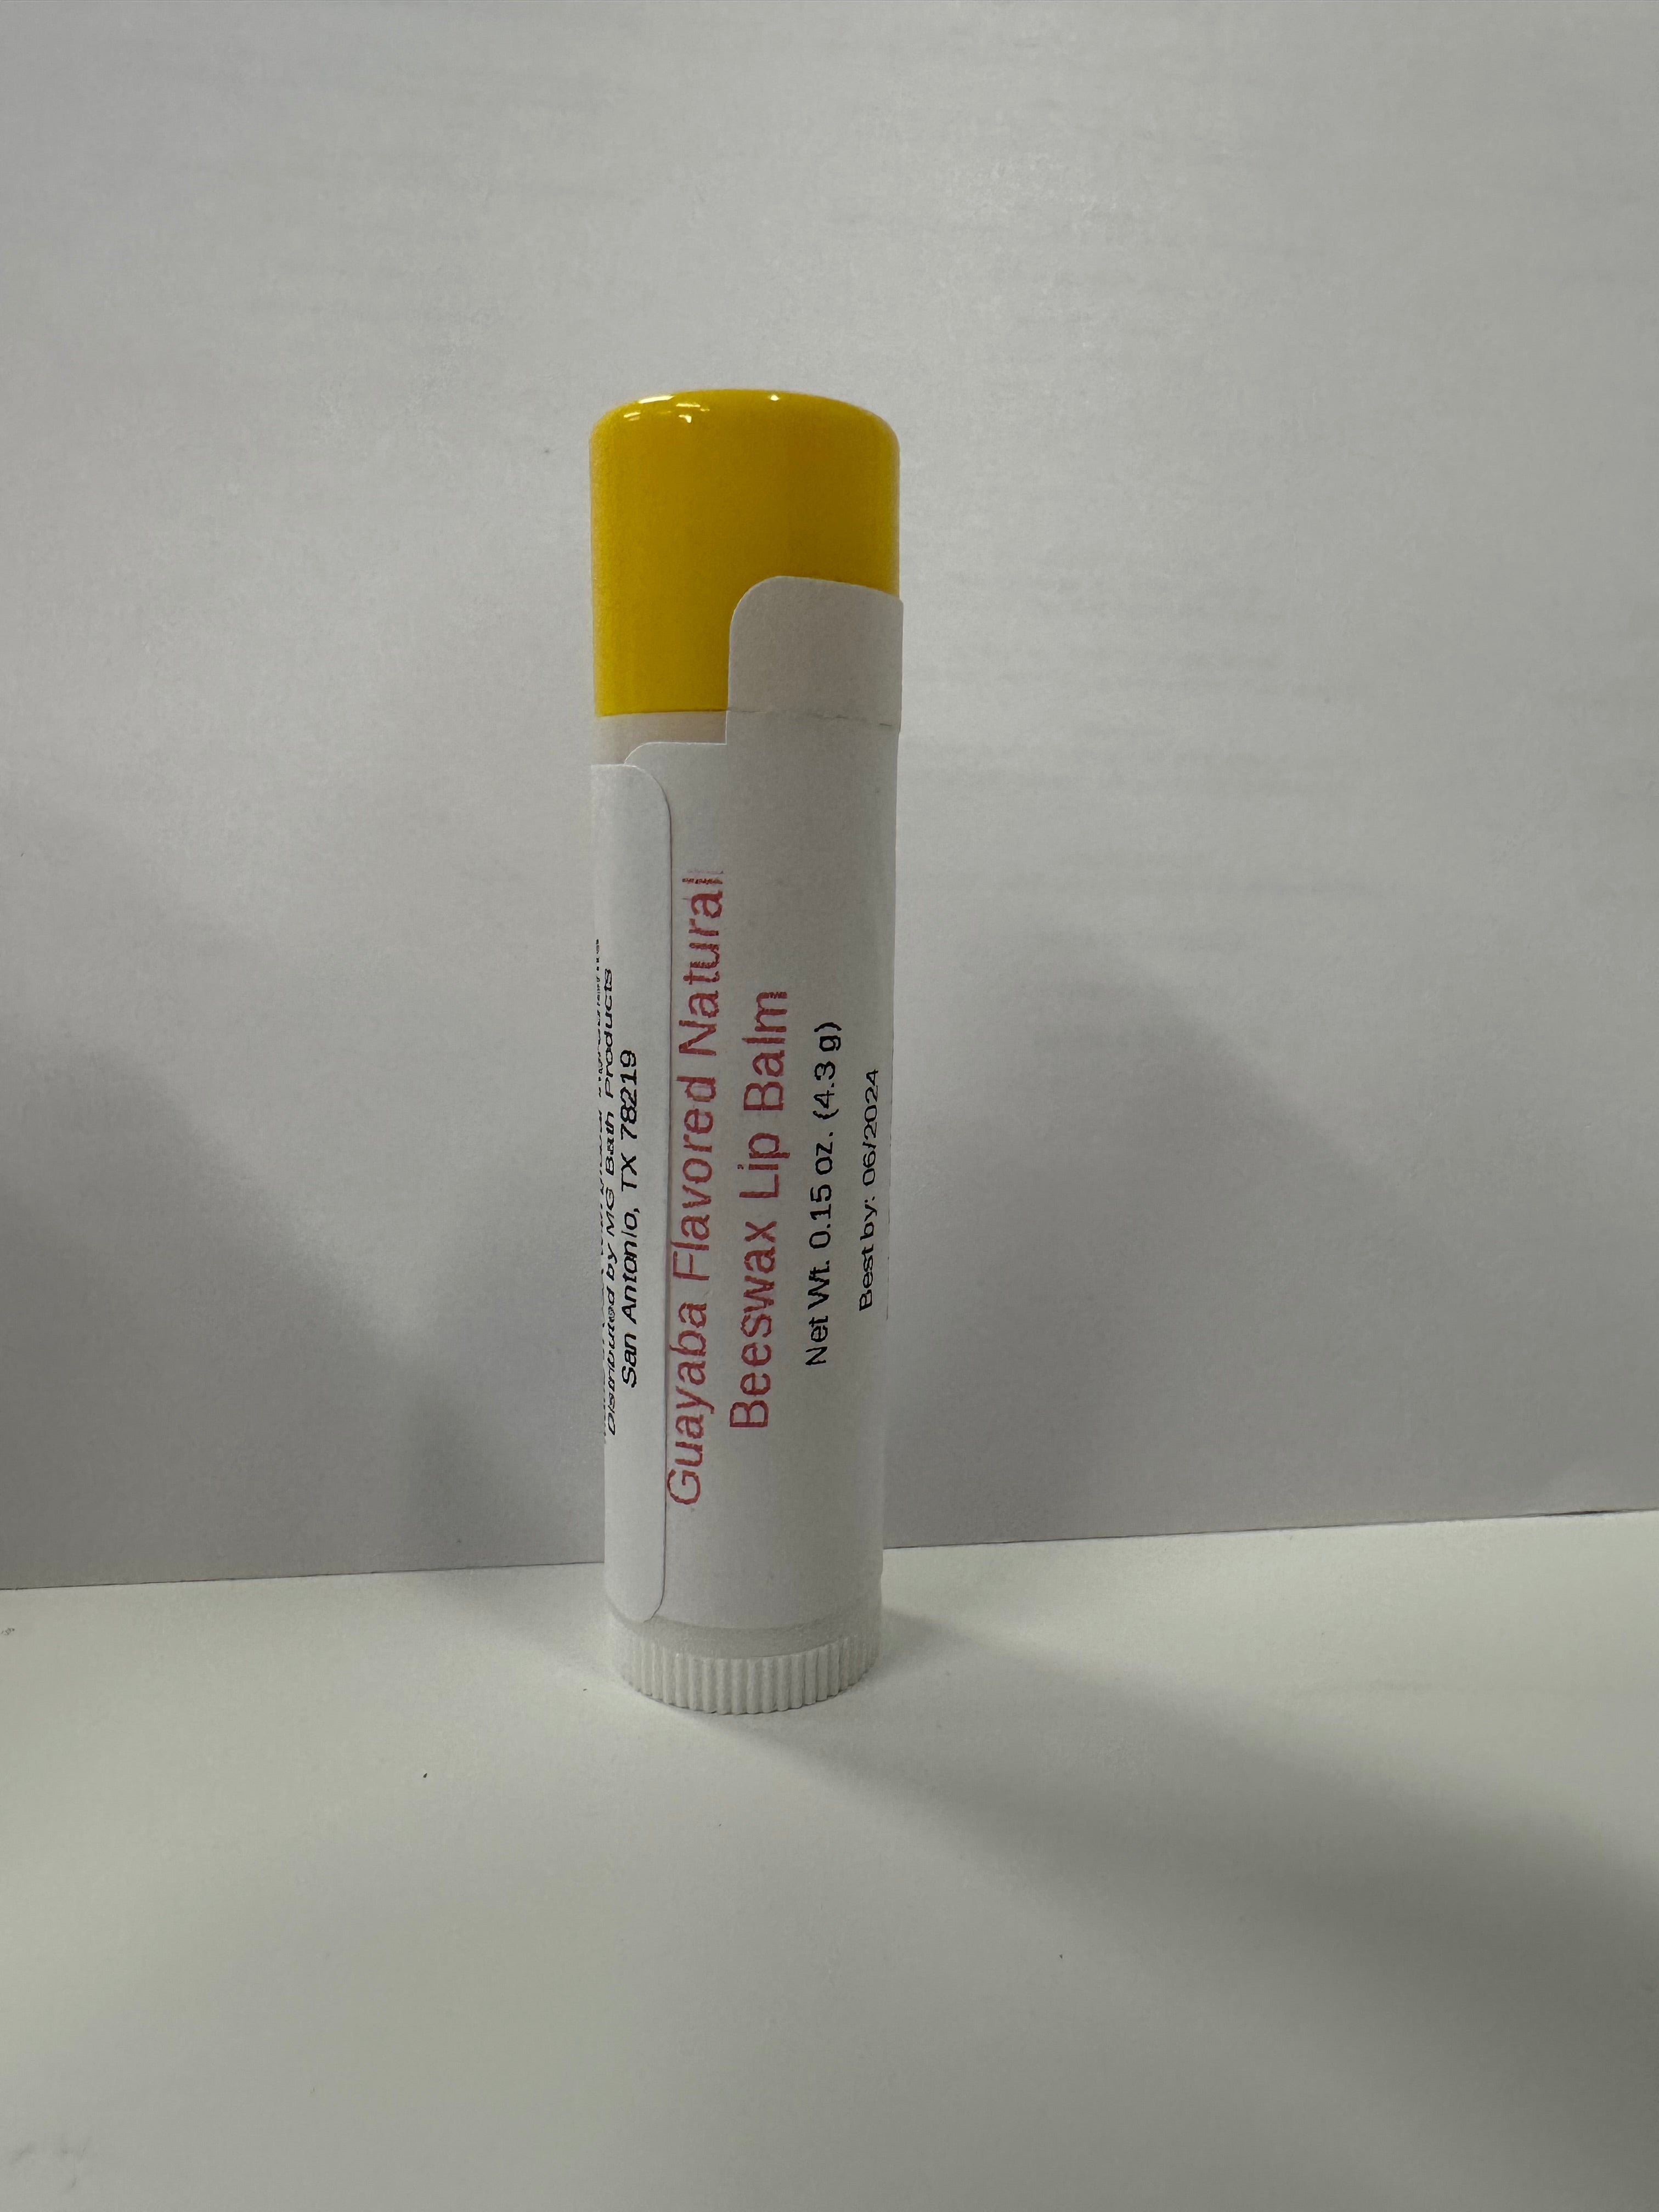 Lip balm in tube that has a yellow colored cap.